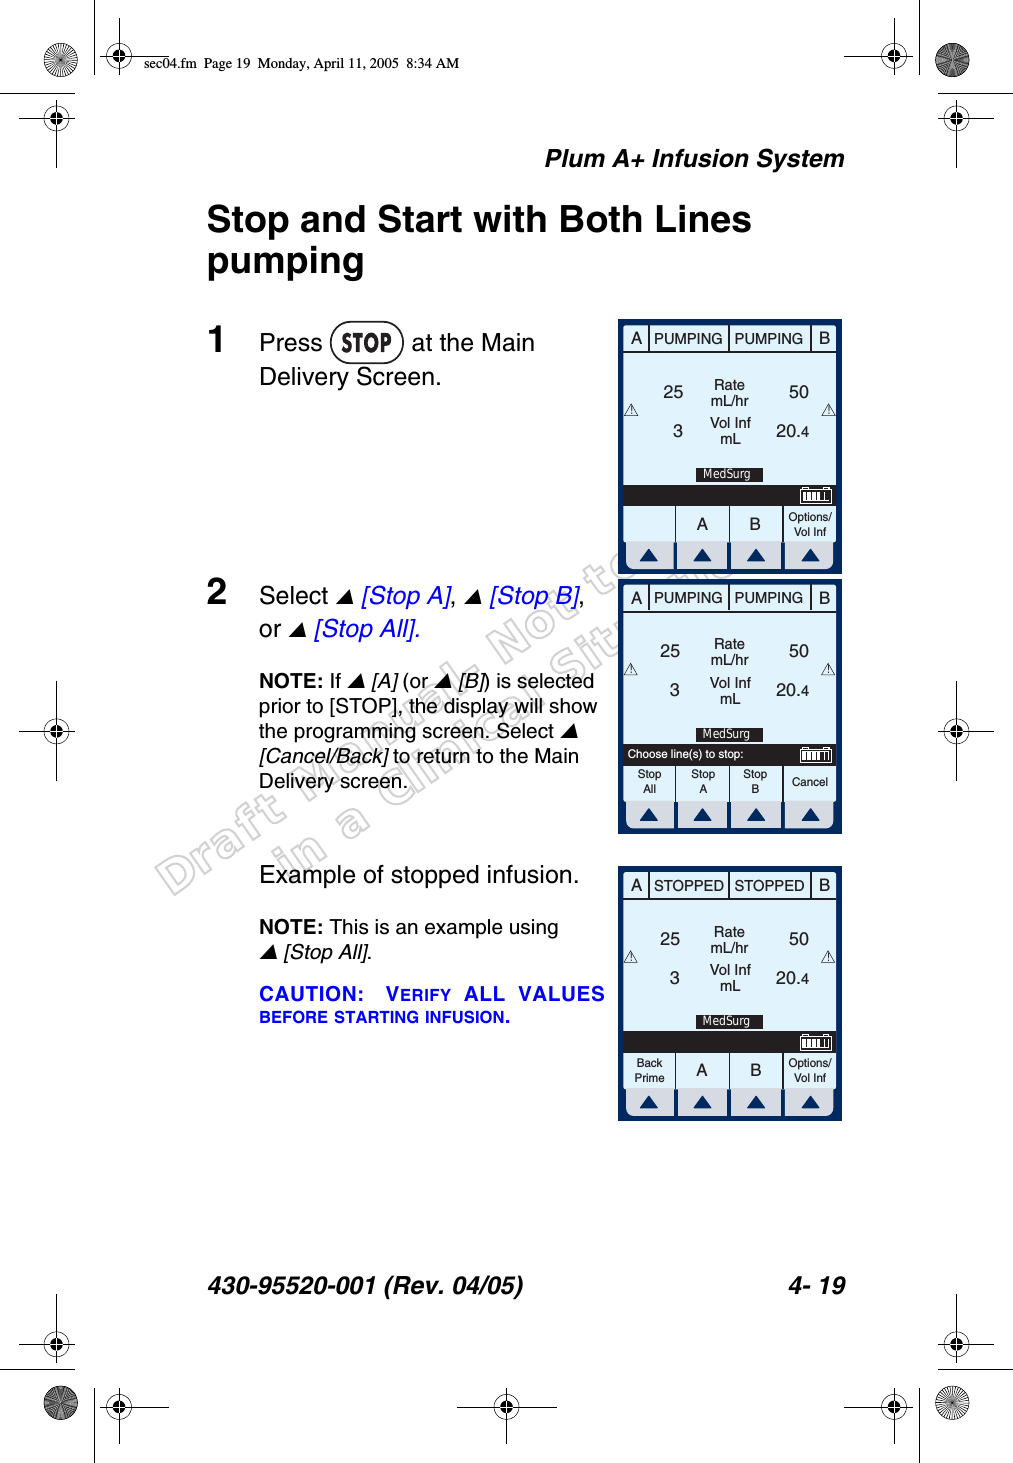 Draft Manual- Not to be usedin a Clinical Situation.Plum A+ Infusion System430-95520-001 (Rev. 04/05) 4- 19Stop and Start with Both Lines pumping1Press   at the Main Delivery Screen.2Select  [Stop A],  [Stop B], or  [Stop All].NOTE: If  [A] (or  [B]) is selected prior to [STOP], the display will show the programming screen. Select  [Cancel/Back] to return to the Main Delivery screen.Example of stopped infusion.NOTE: This is an example using  [Stop All].CAUTION: VERIFY ALL VALUESBEFORE STARTING INFUSION.AABBPUMPING PUMPINGRatemL/hrVol InfmLOptions/Vol Inf253 20.450!!MedSurgABPUMPING PUMPINGRatemL/hrVol InfmLCancel253 20.450StopAllStopAStopBChoose line(s) to stop:!!MedSurgAABBSTOPPED STOPPEDRatemL/hrVol InfmLOptions/Vol Inf253 20.450BackPrime!!MedSurgsec04.fm  Page 19  Monday, April 11, 2005  8:34 AM